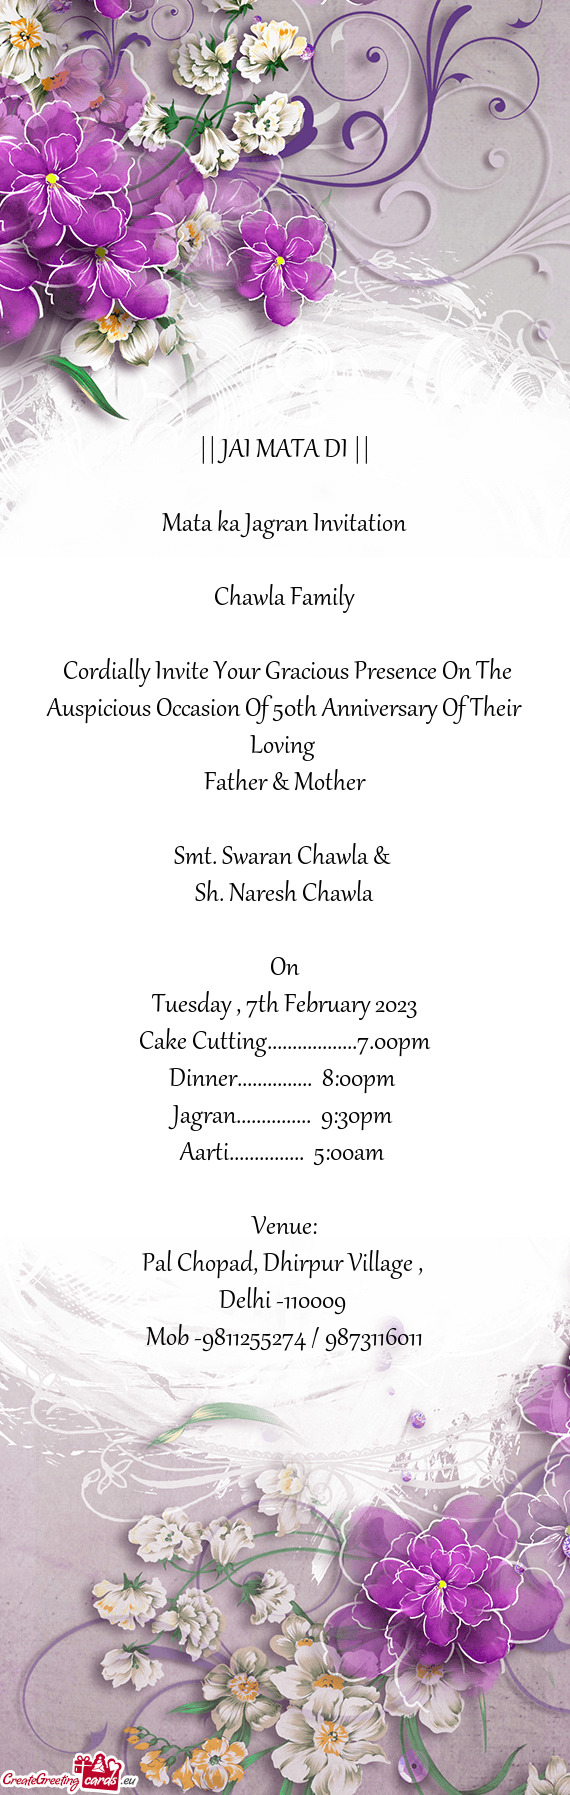 Cordially Invite Your Gracious Presence On The Auspicious Occasion Of 50th Anniversary Of Their Lov